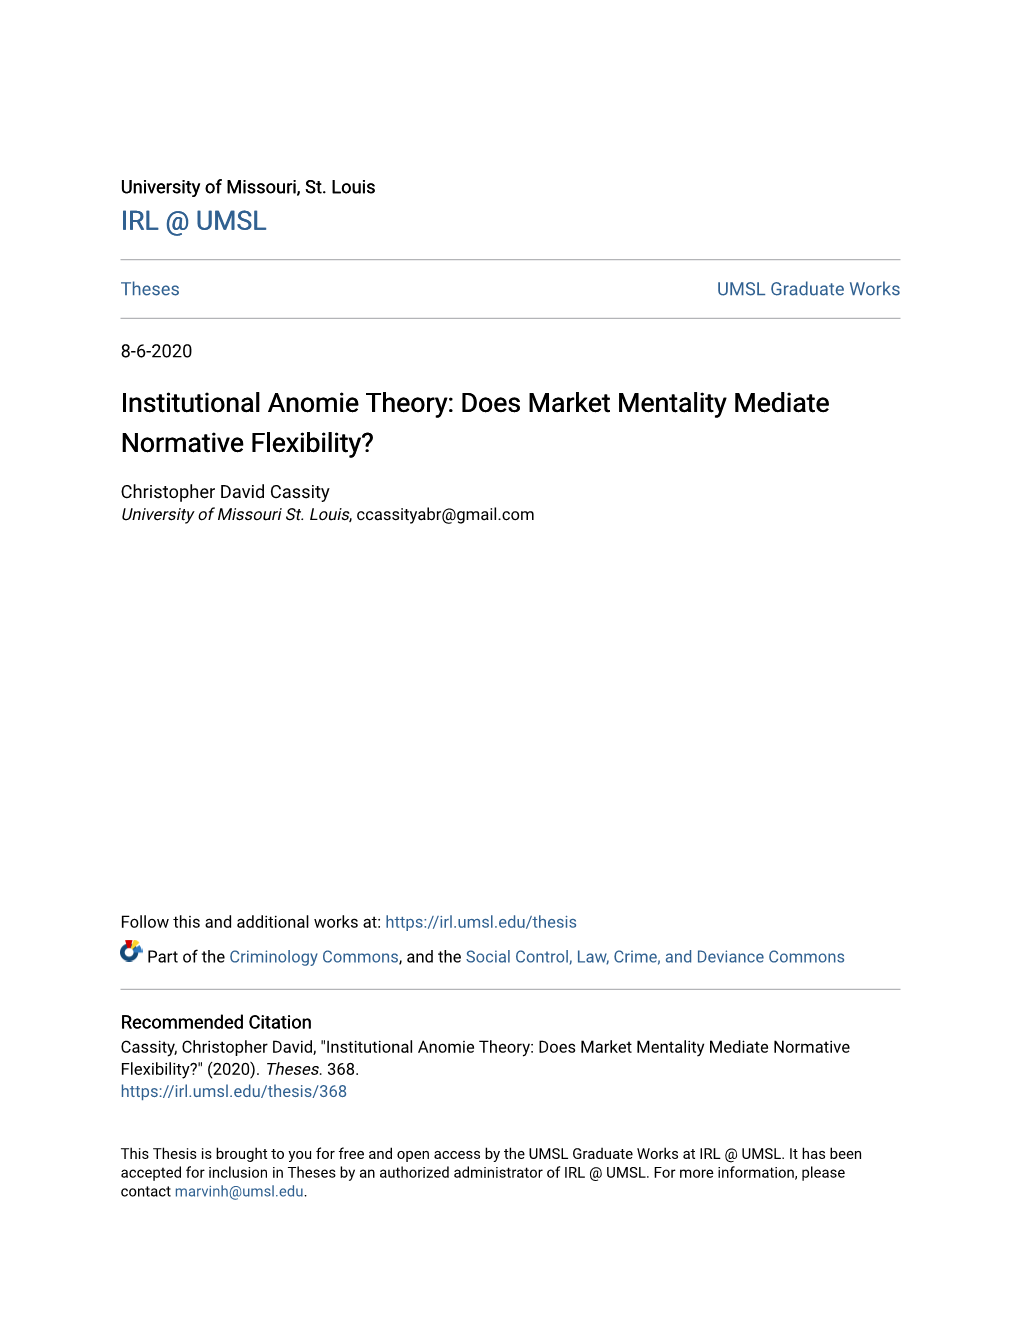 Institutional Anomie Theory: Does Market Mentality Mediate Normative Flexibility?